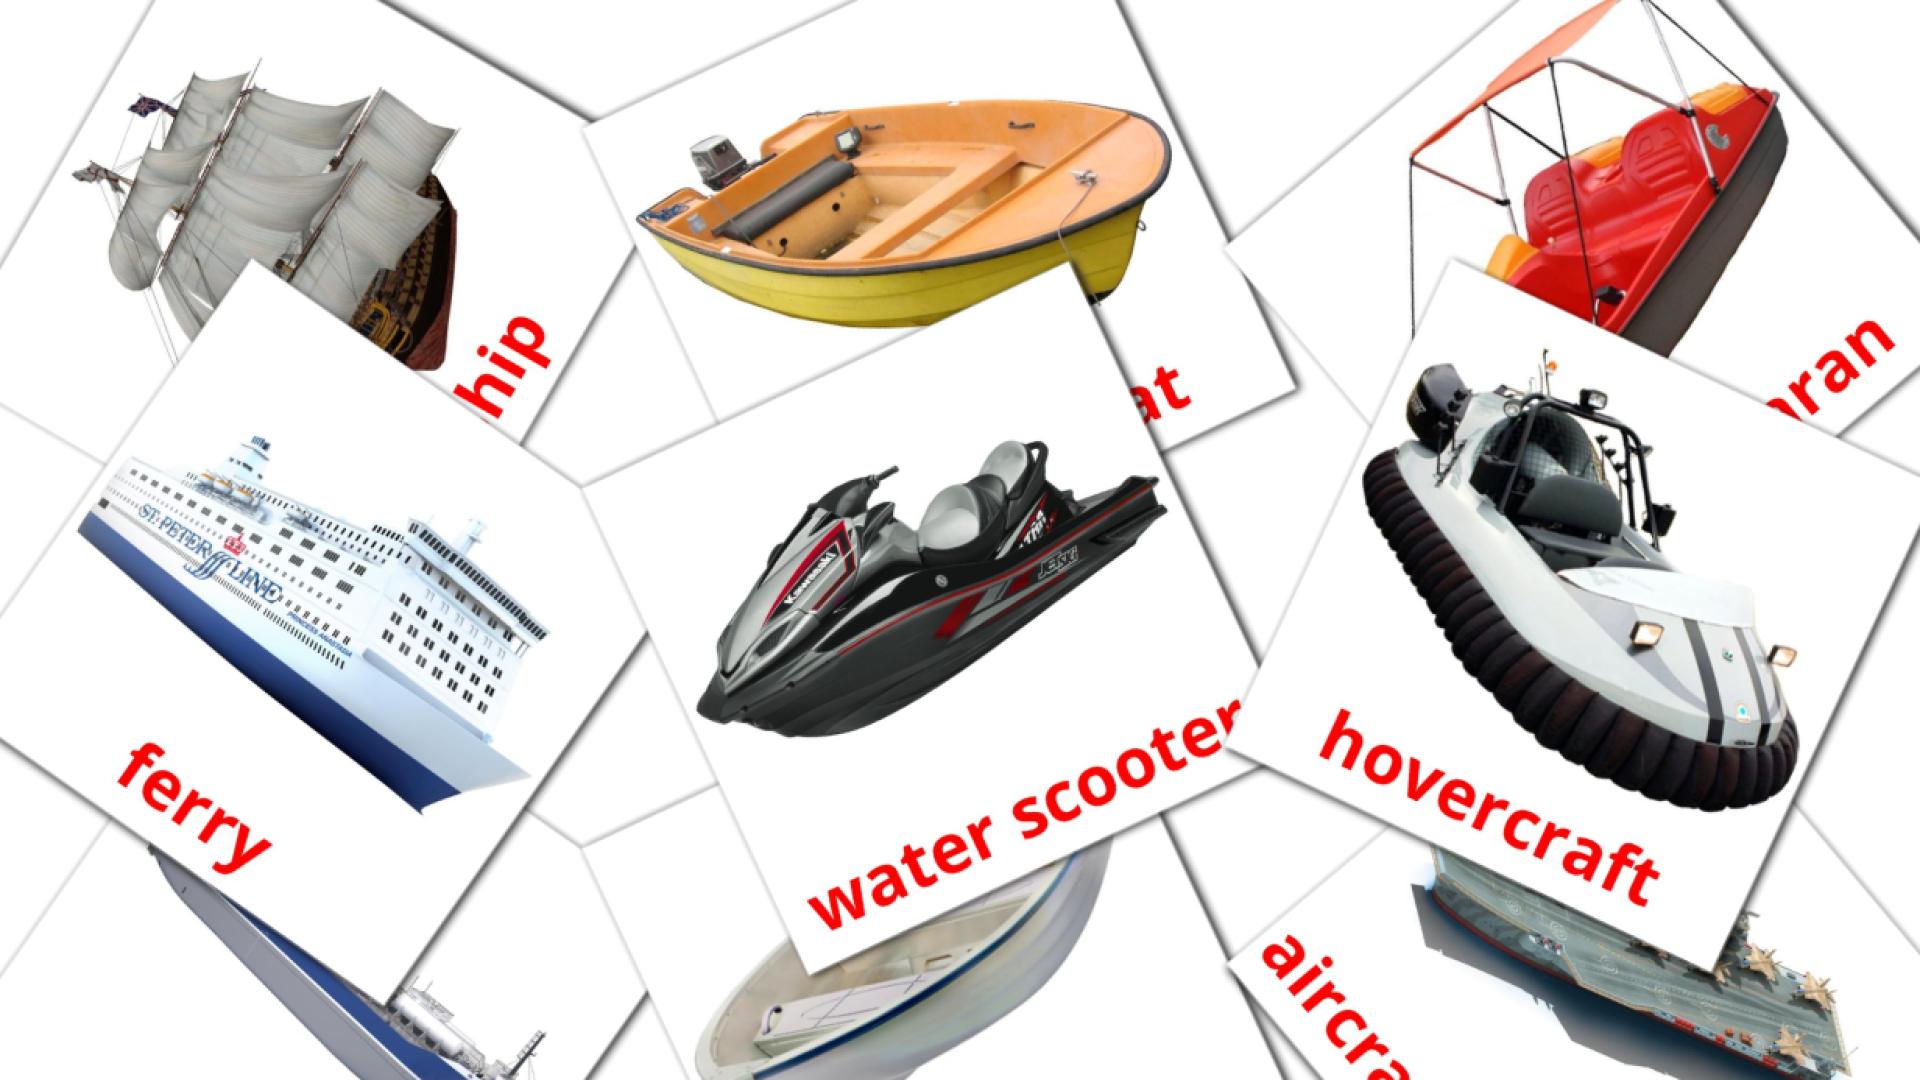 18 Water transport flashcards